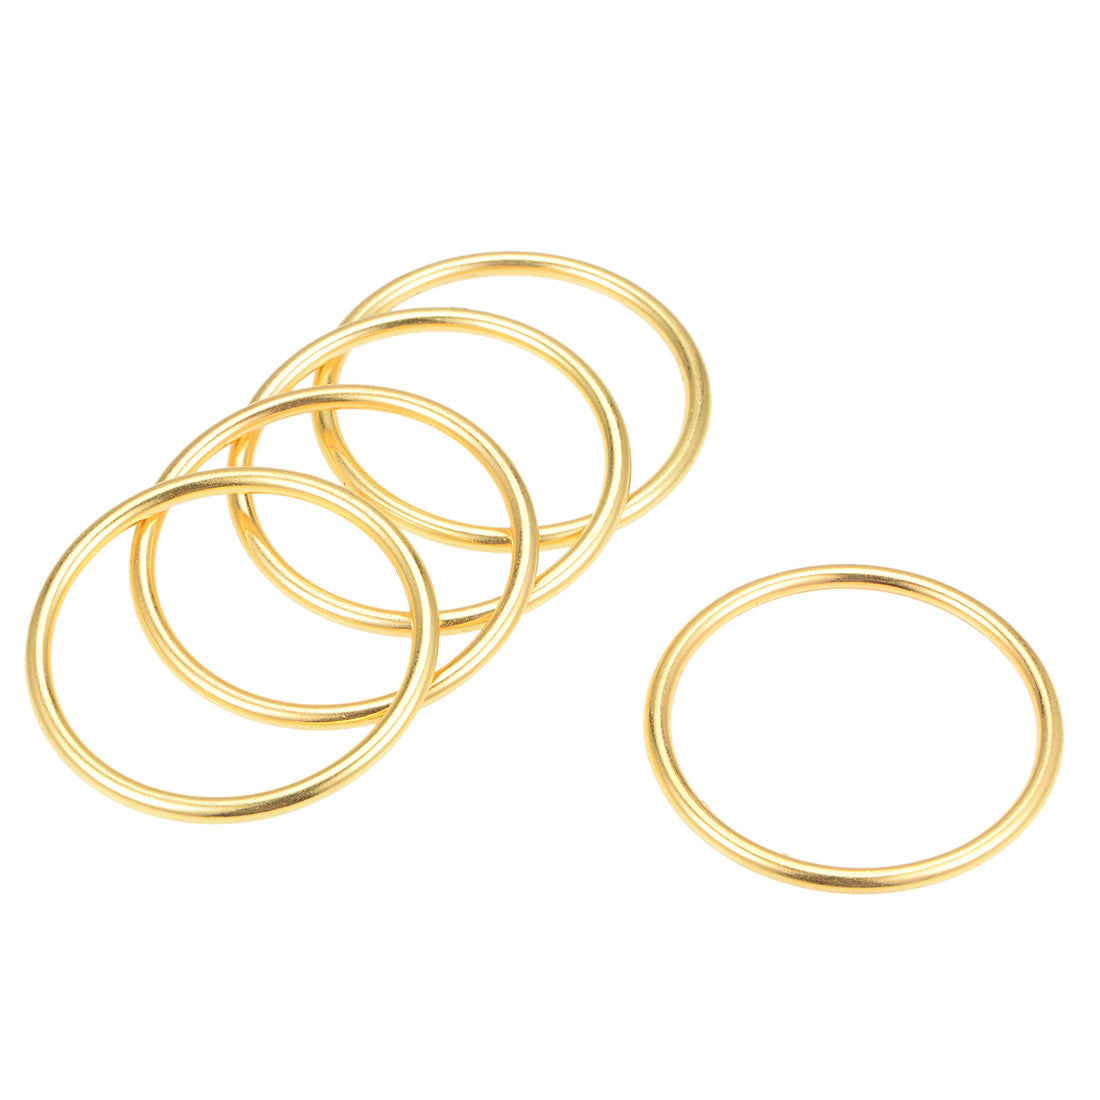 uxcell Uxcell O Ring Buckle 40mm(1.6") ID 3mm Thickness Zinc Alloy O-Rings for Hardware Bags Belts Craft DIY Accessories, Gold Tone 5pcs